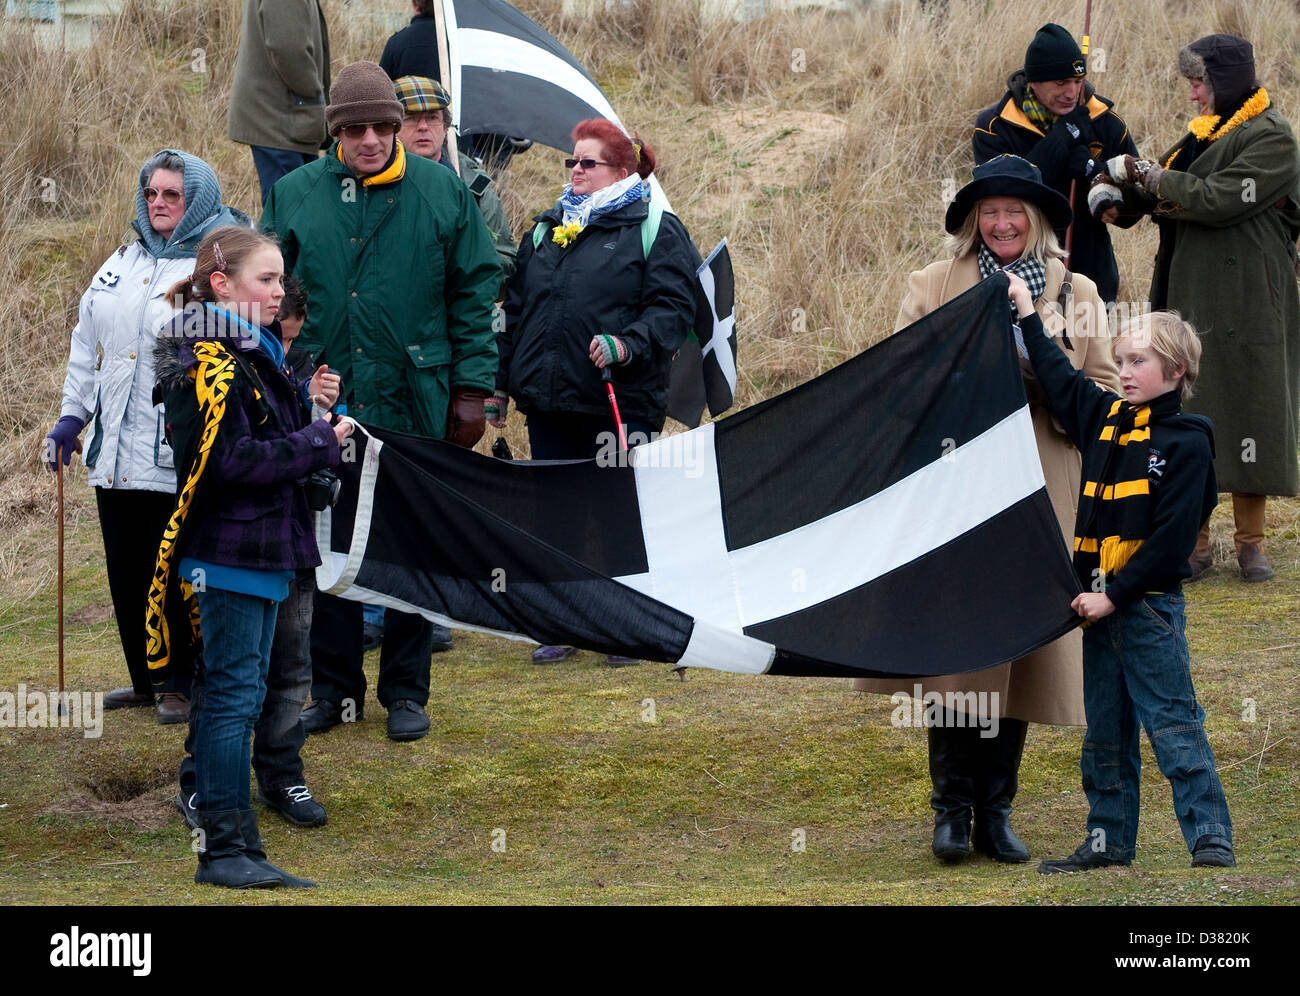 a family with the cornish flag on st.pirans day in cornwall, uk Stock Photo